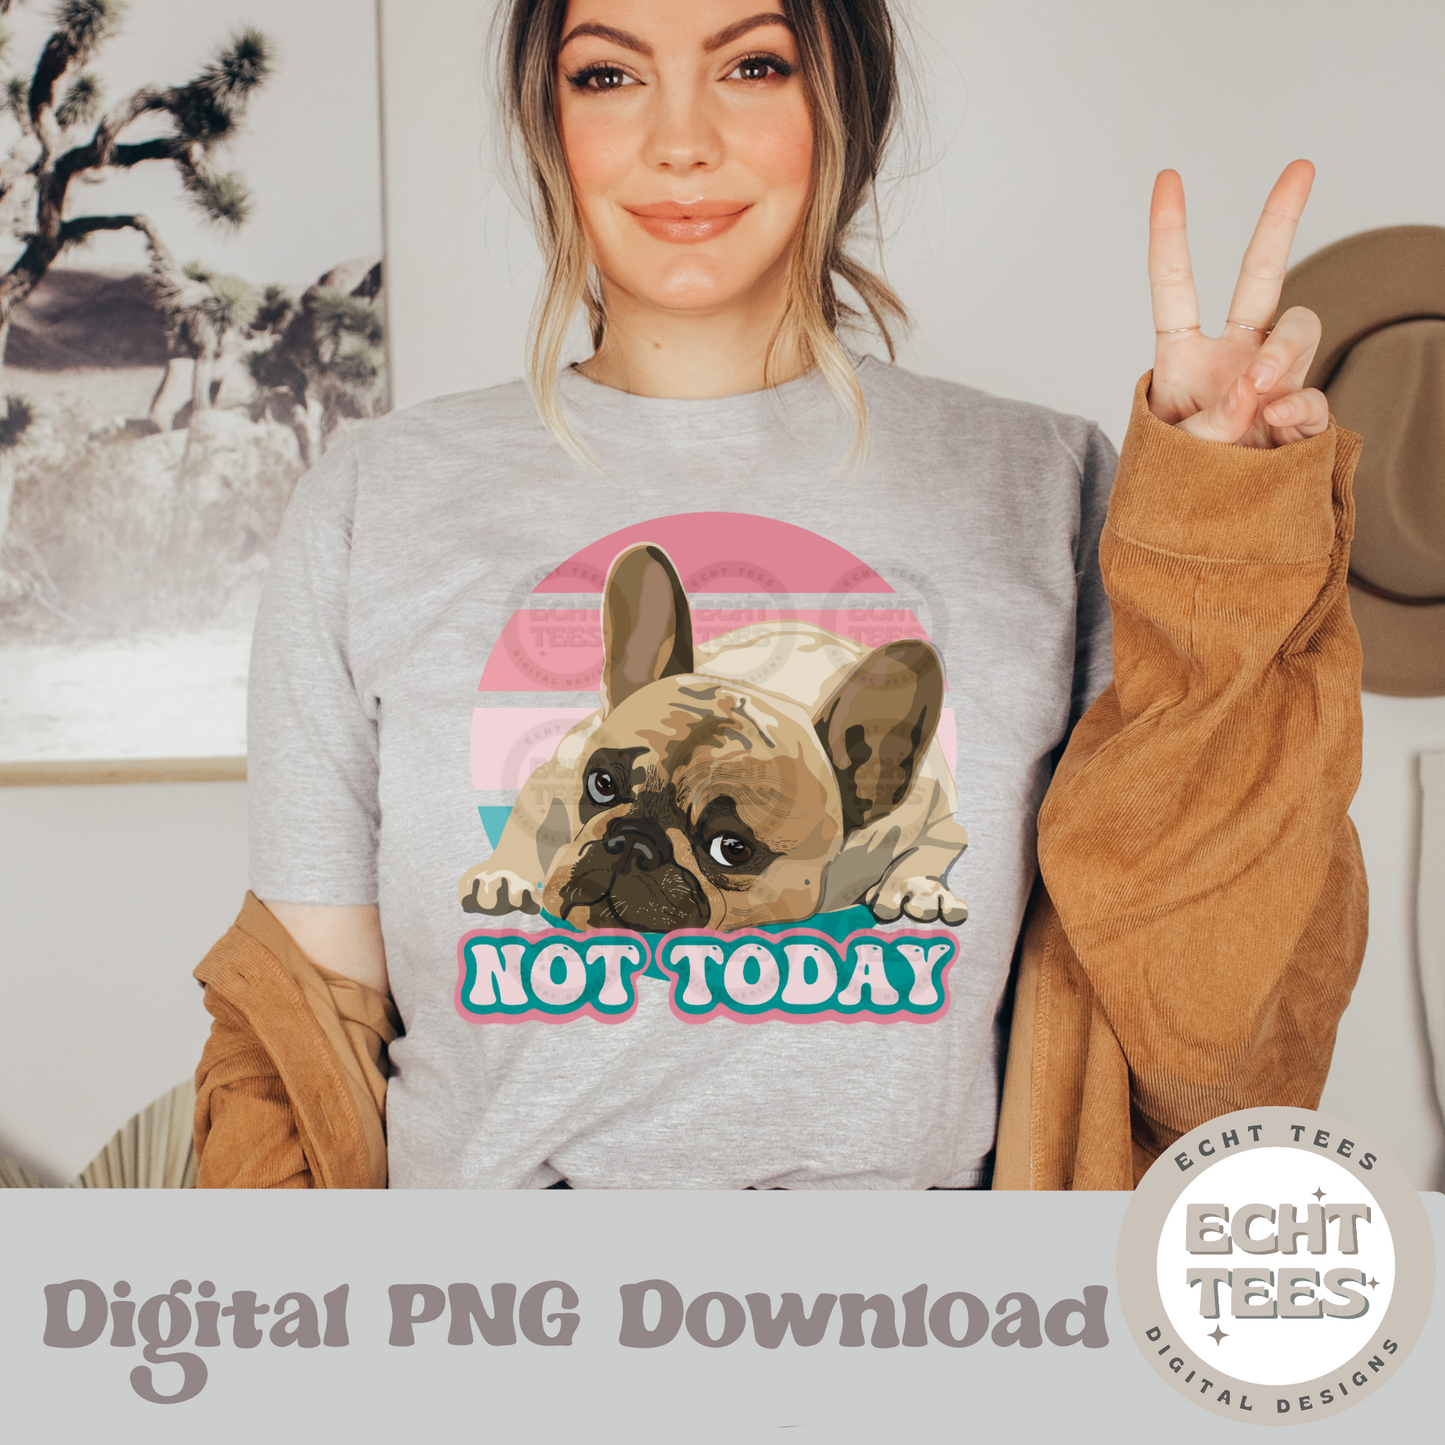 Not Today PNG Digital Download